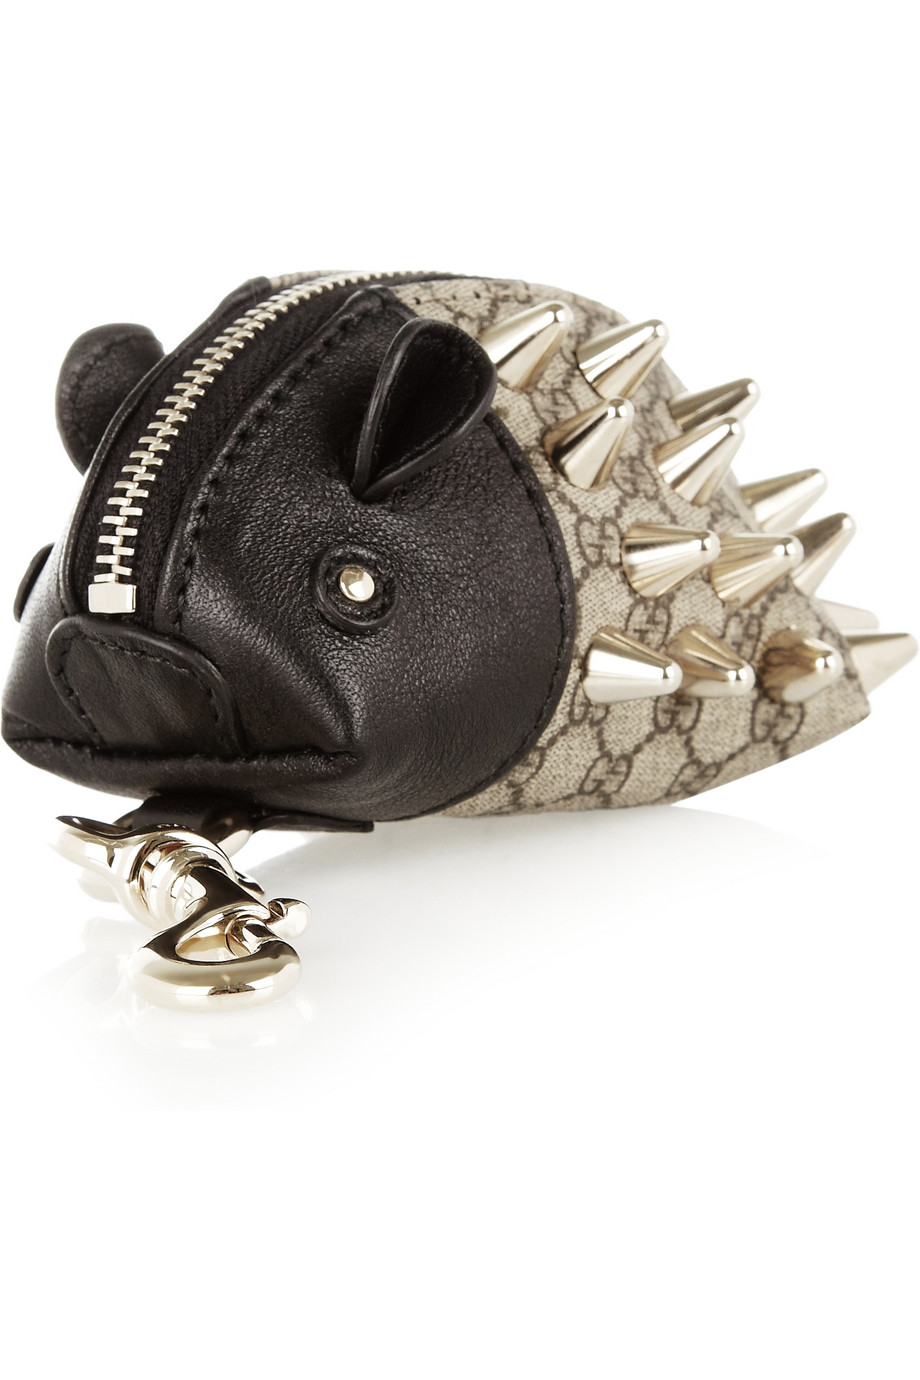 Gucci Hedgehog Leather and Twill Coin Purse in Black - Lyst